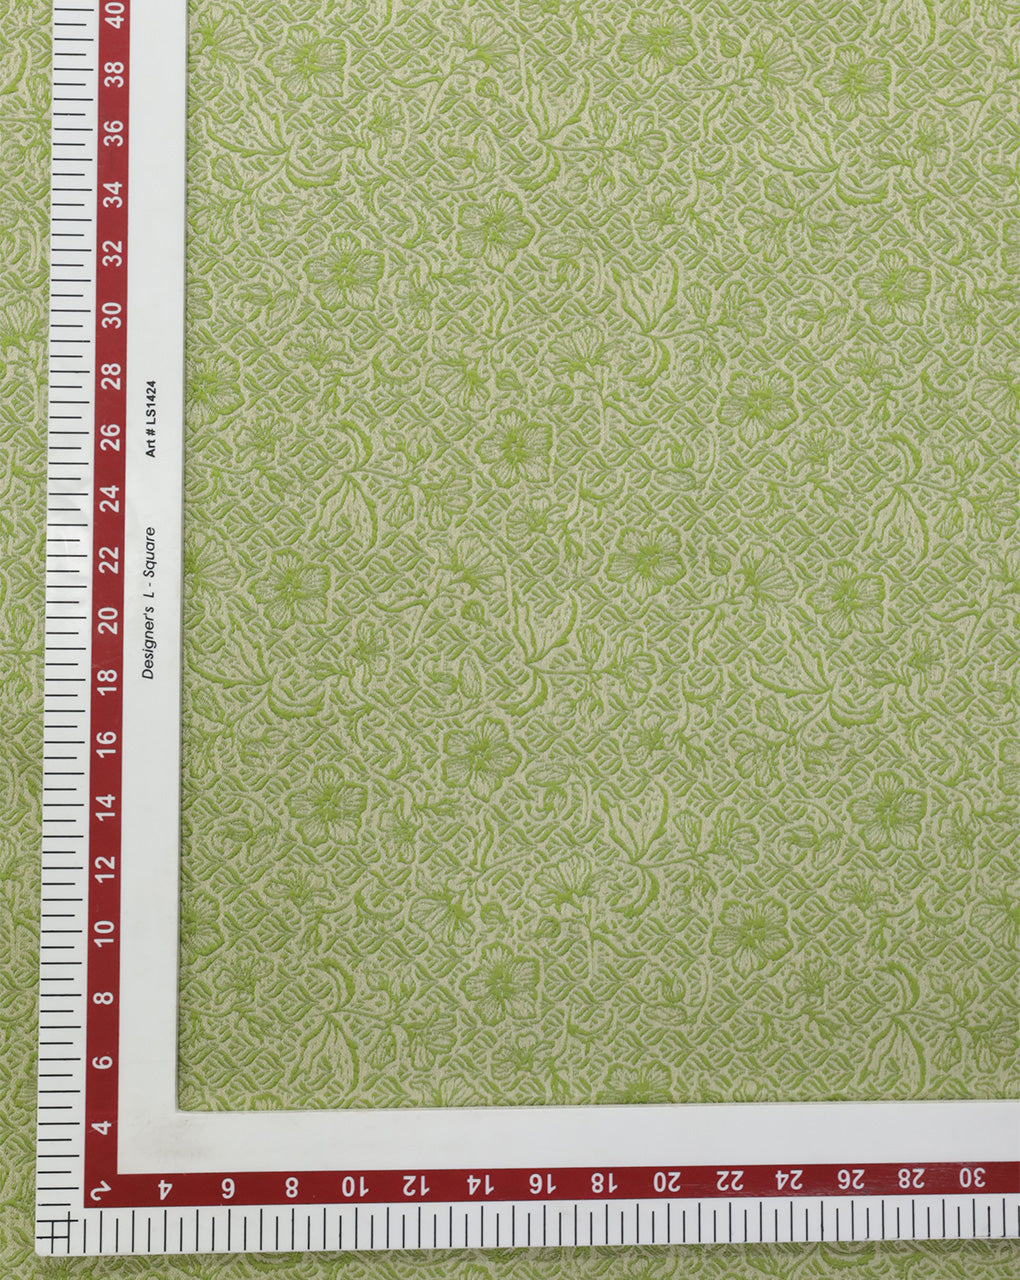 GREEN FLORAL DESIGN POLYESTER JACQUARD FABRIC